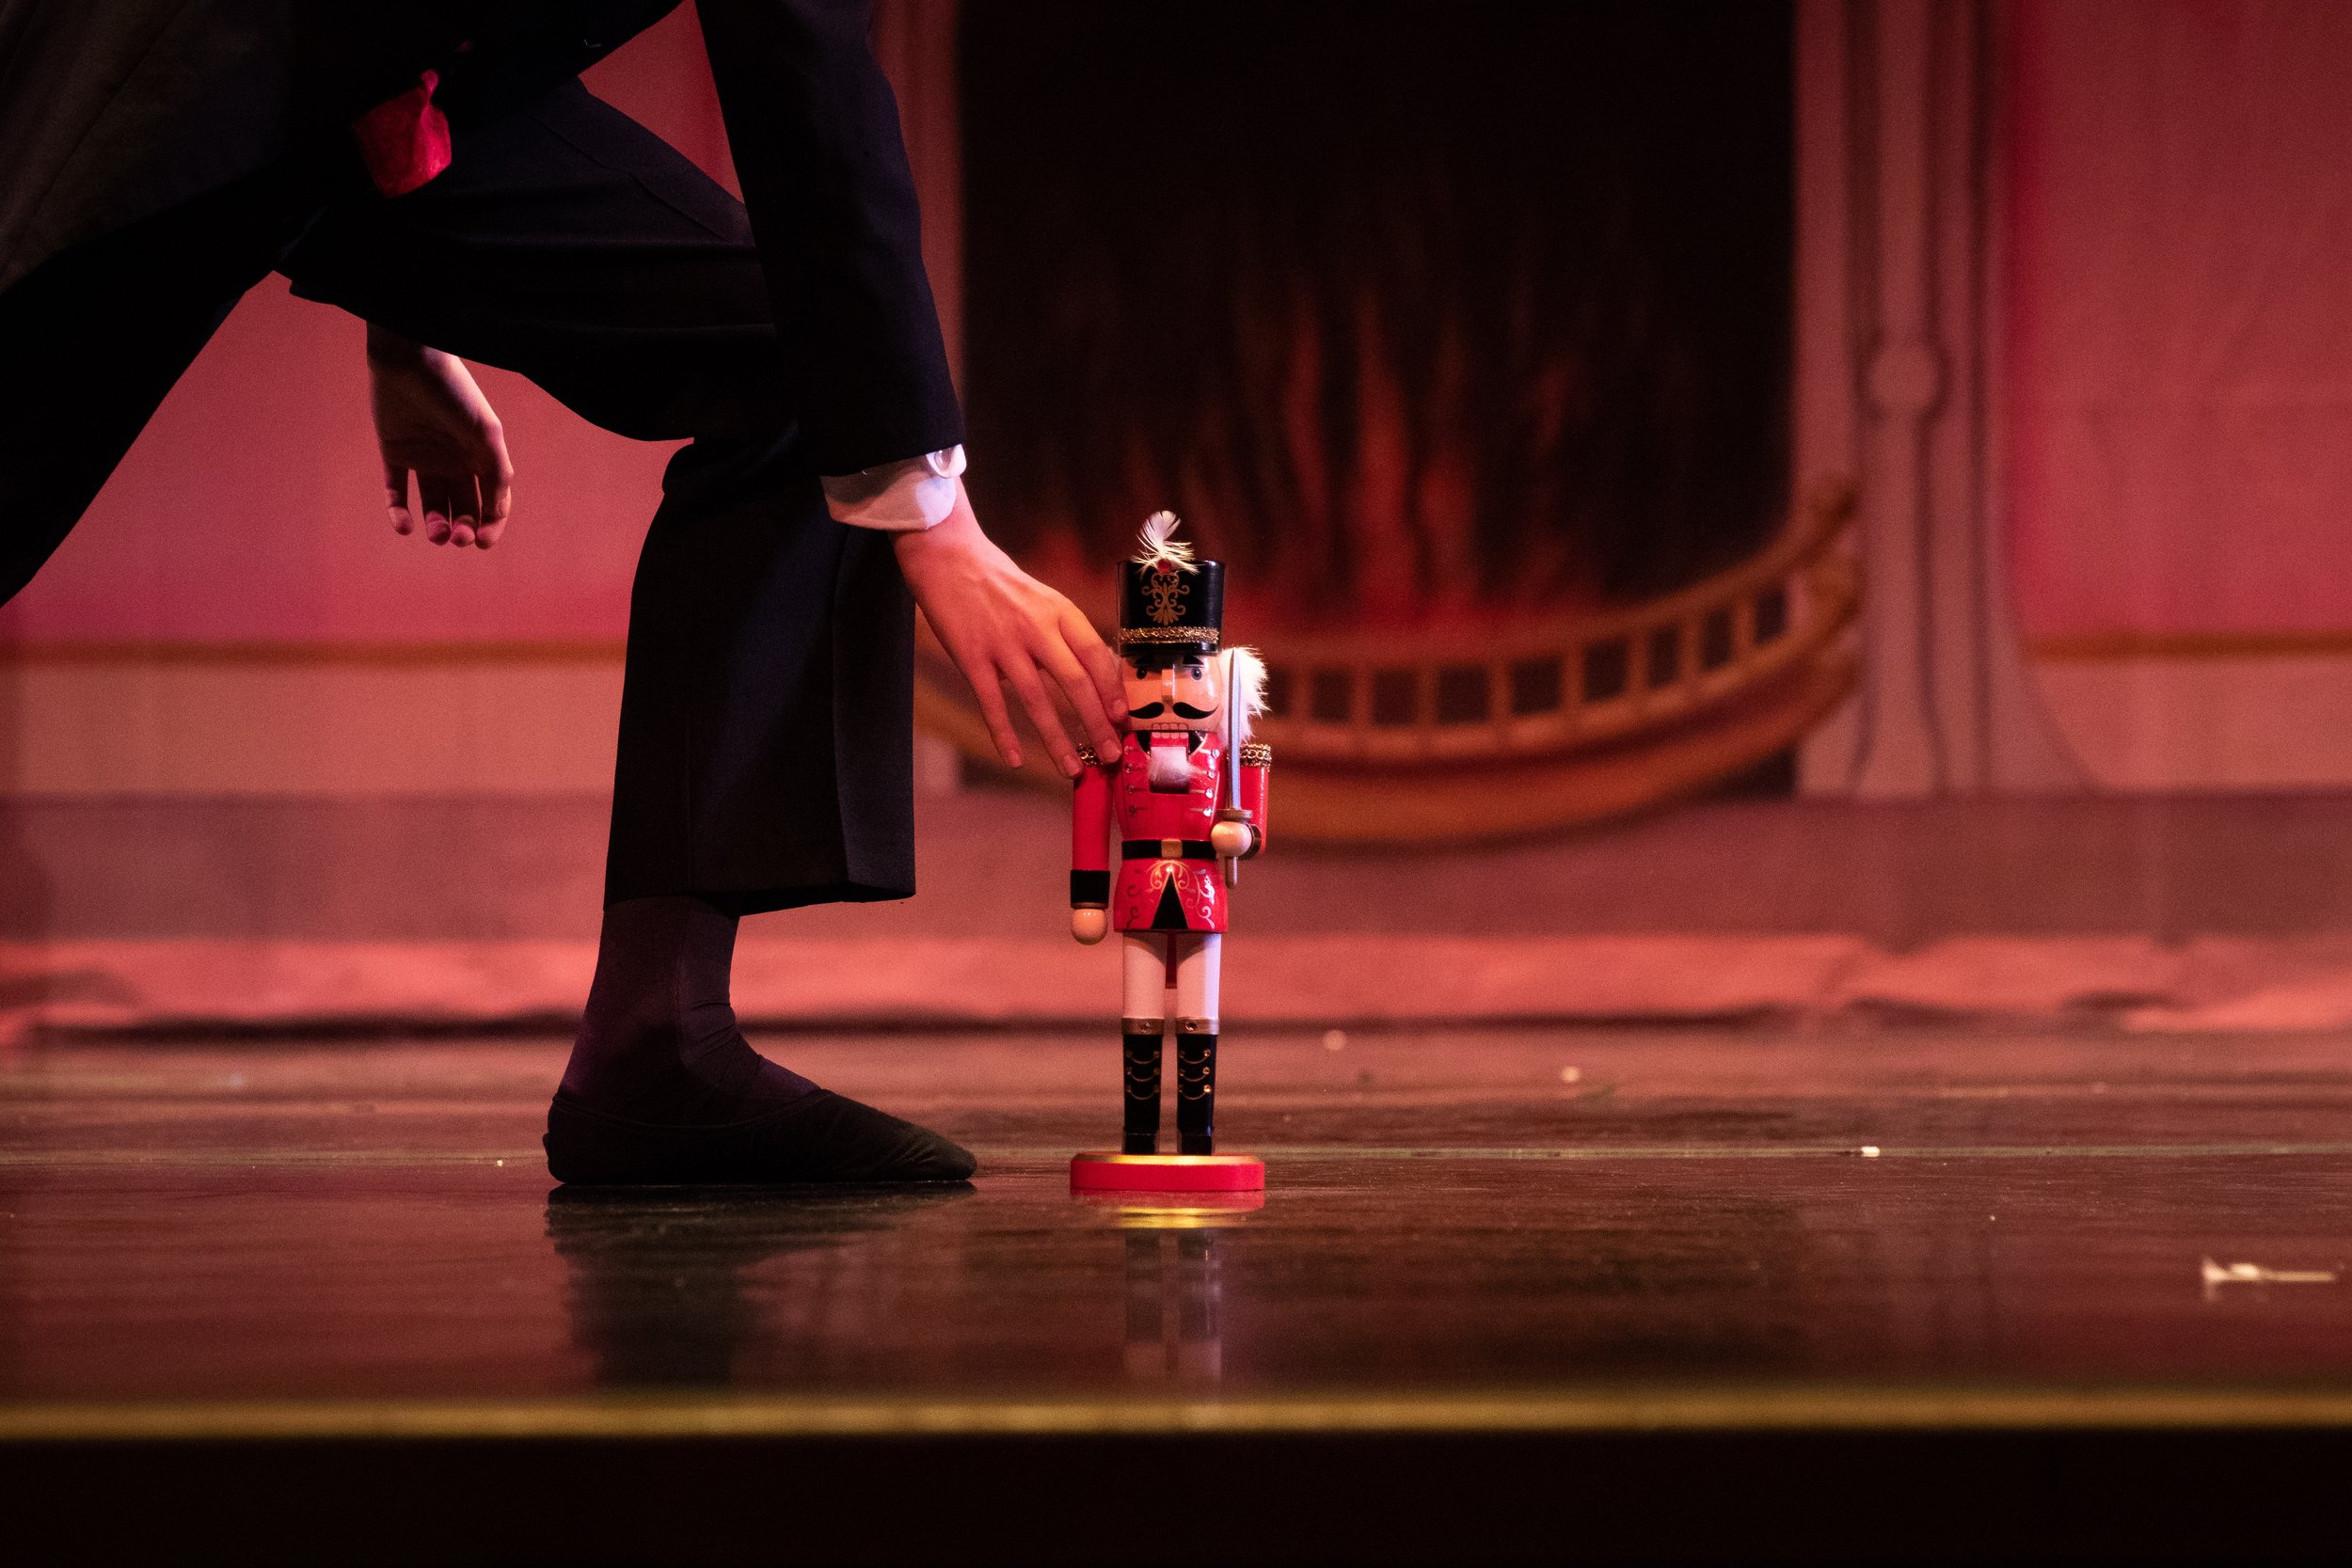  The Nutcracker prop during the first act, second scene, before the toy comes to life, from The Nutcracker performed by Westside Ballet of Santa Monica at the The Broad Stage in Santa Monica, Calif. on Sunday, Dec. 4, 2022. (Caylo Seals | The Corsair